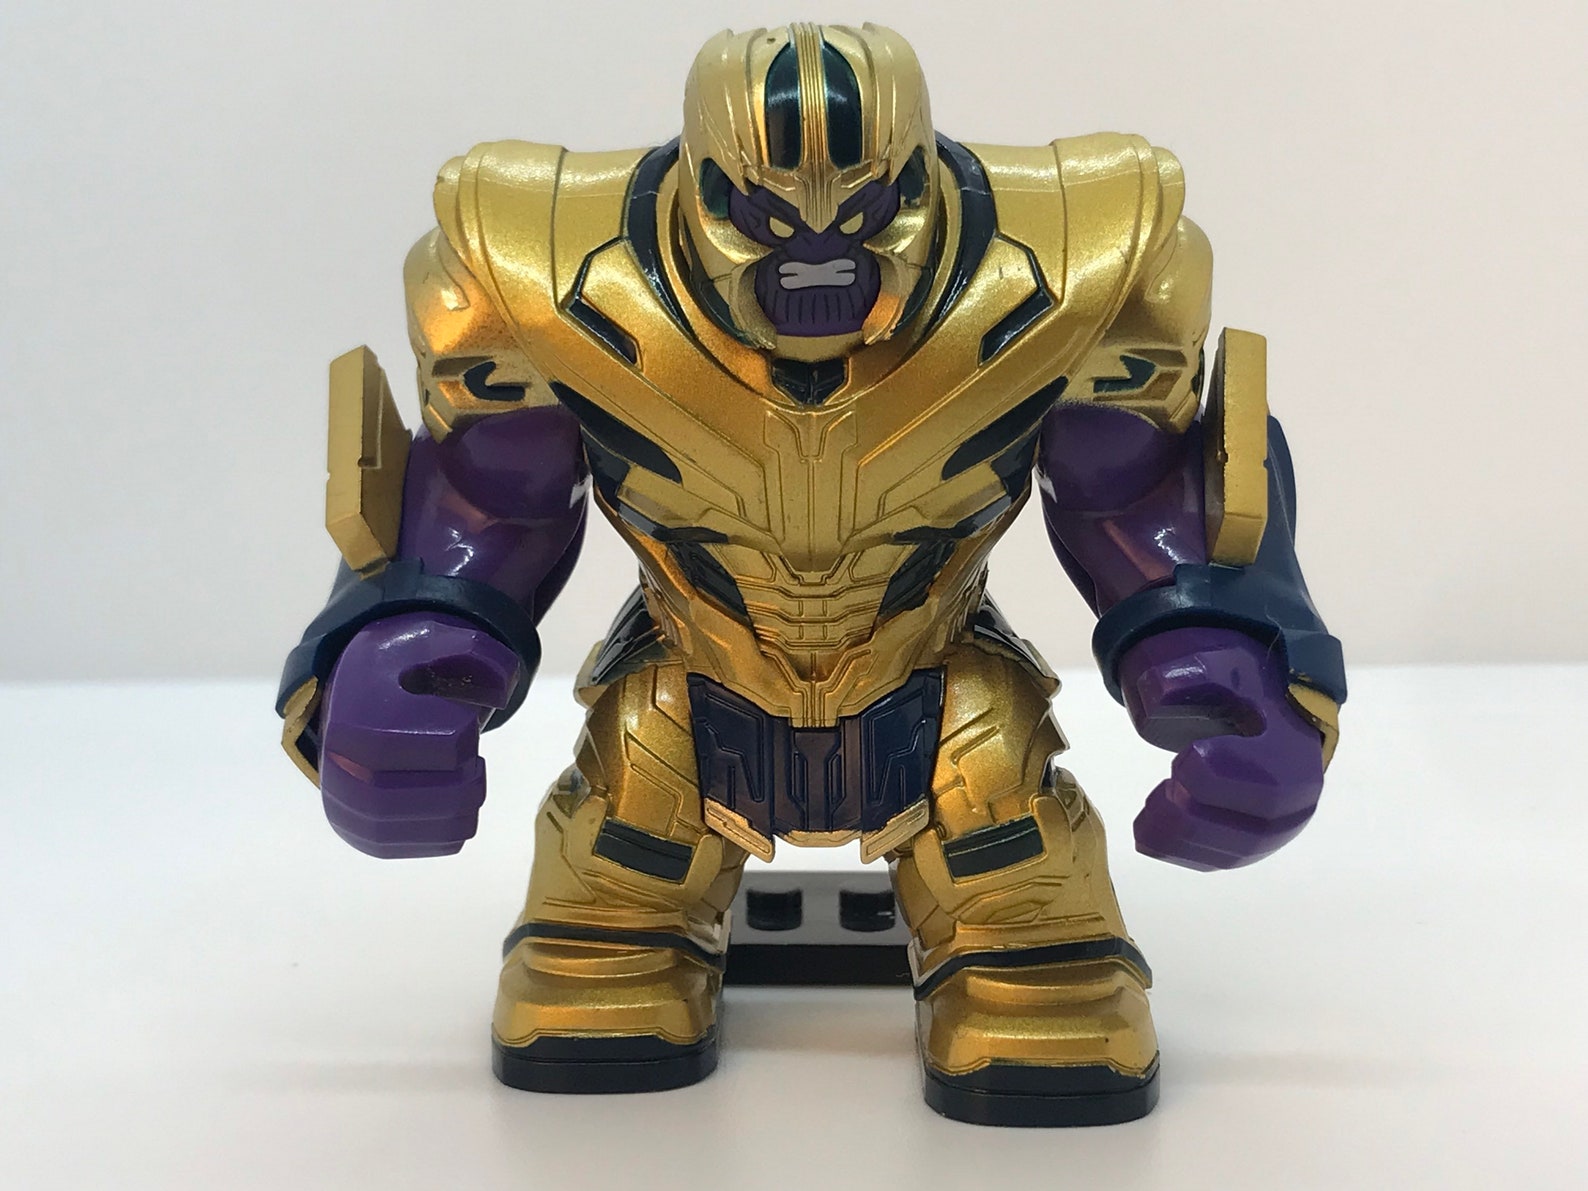 Golden-haired Thanos - wide 4